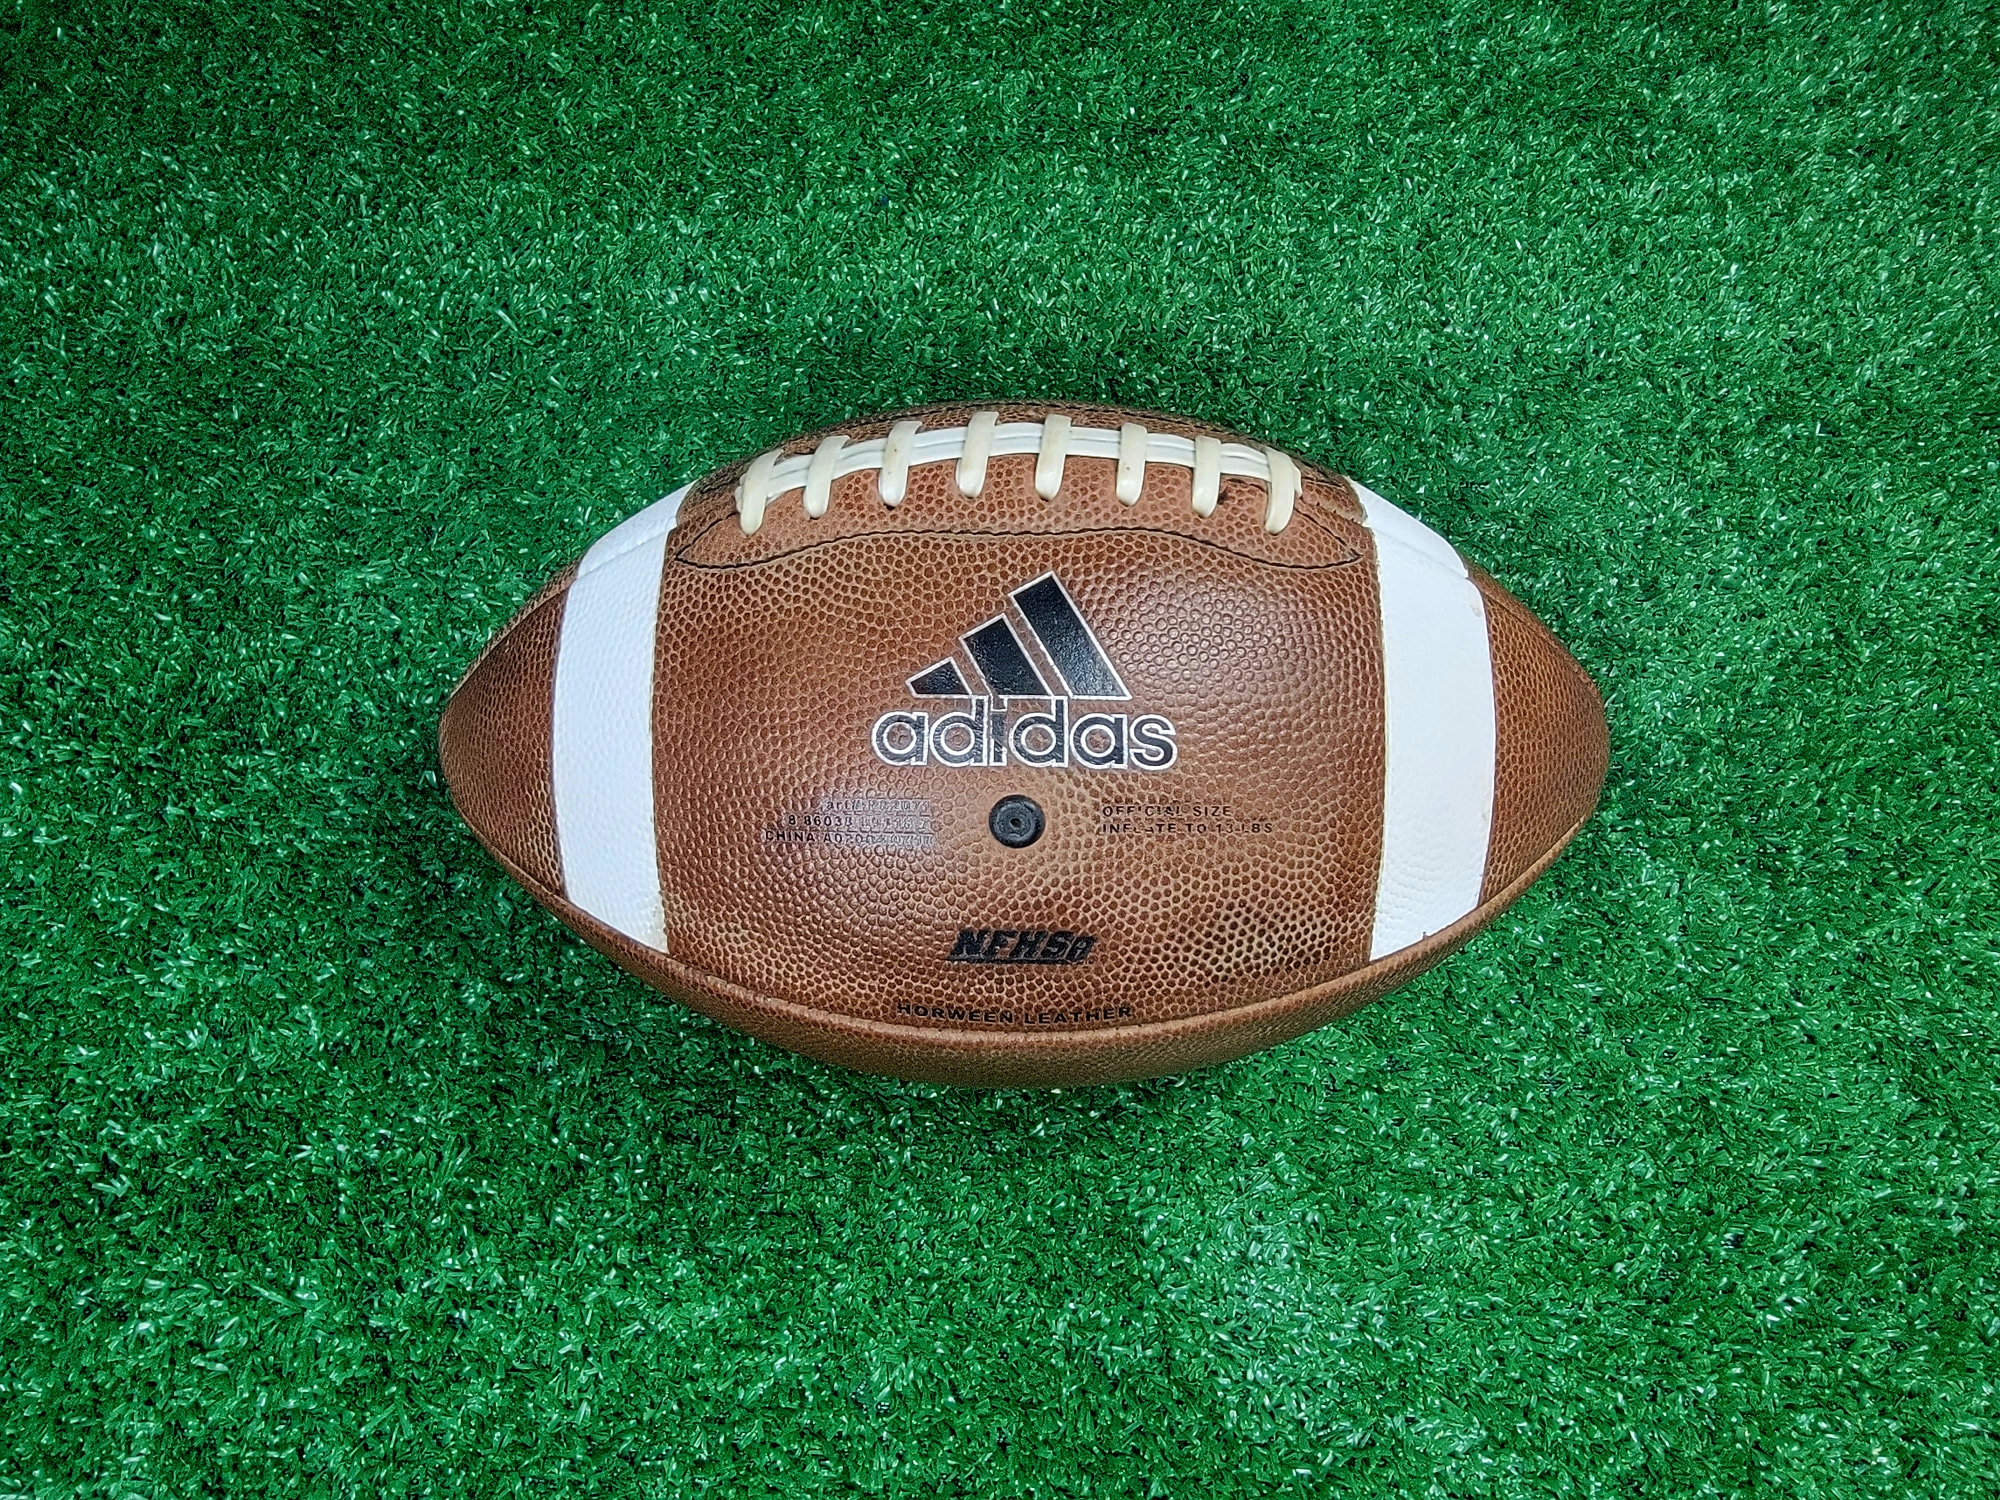 *Brand New Fully Mudded and Prepped Leather Football*